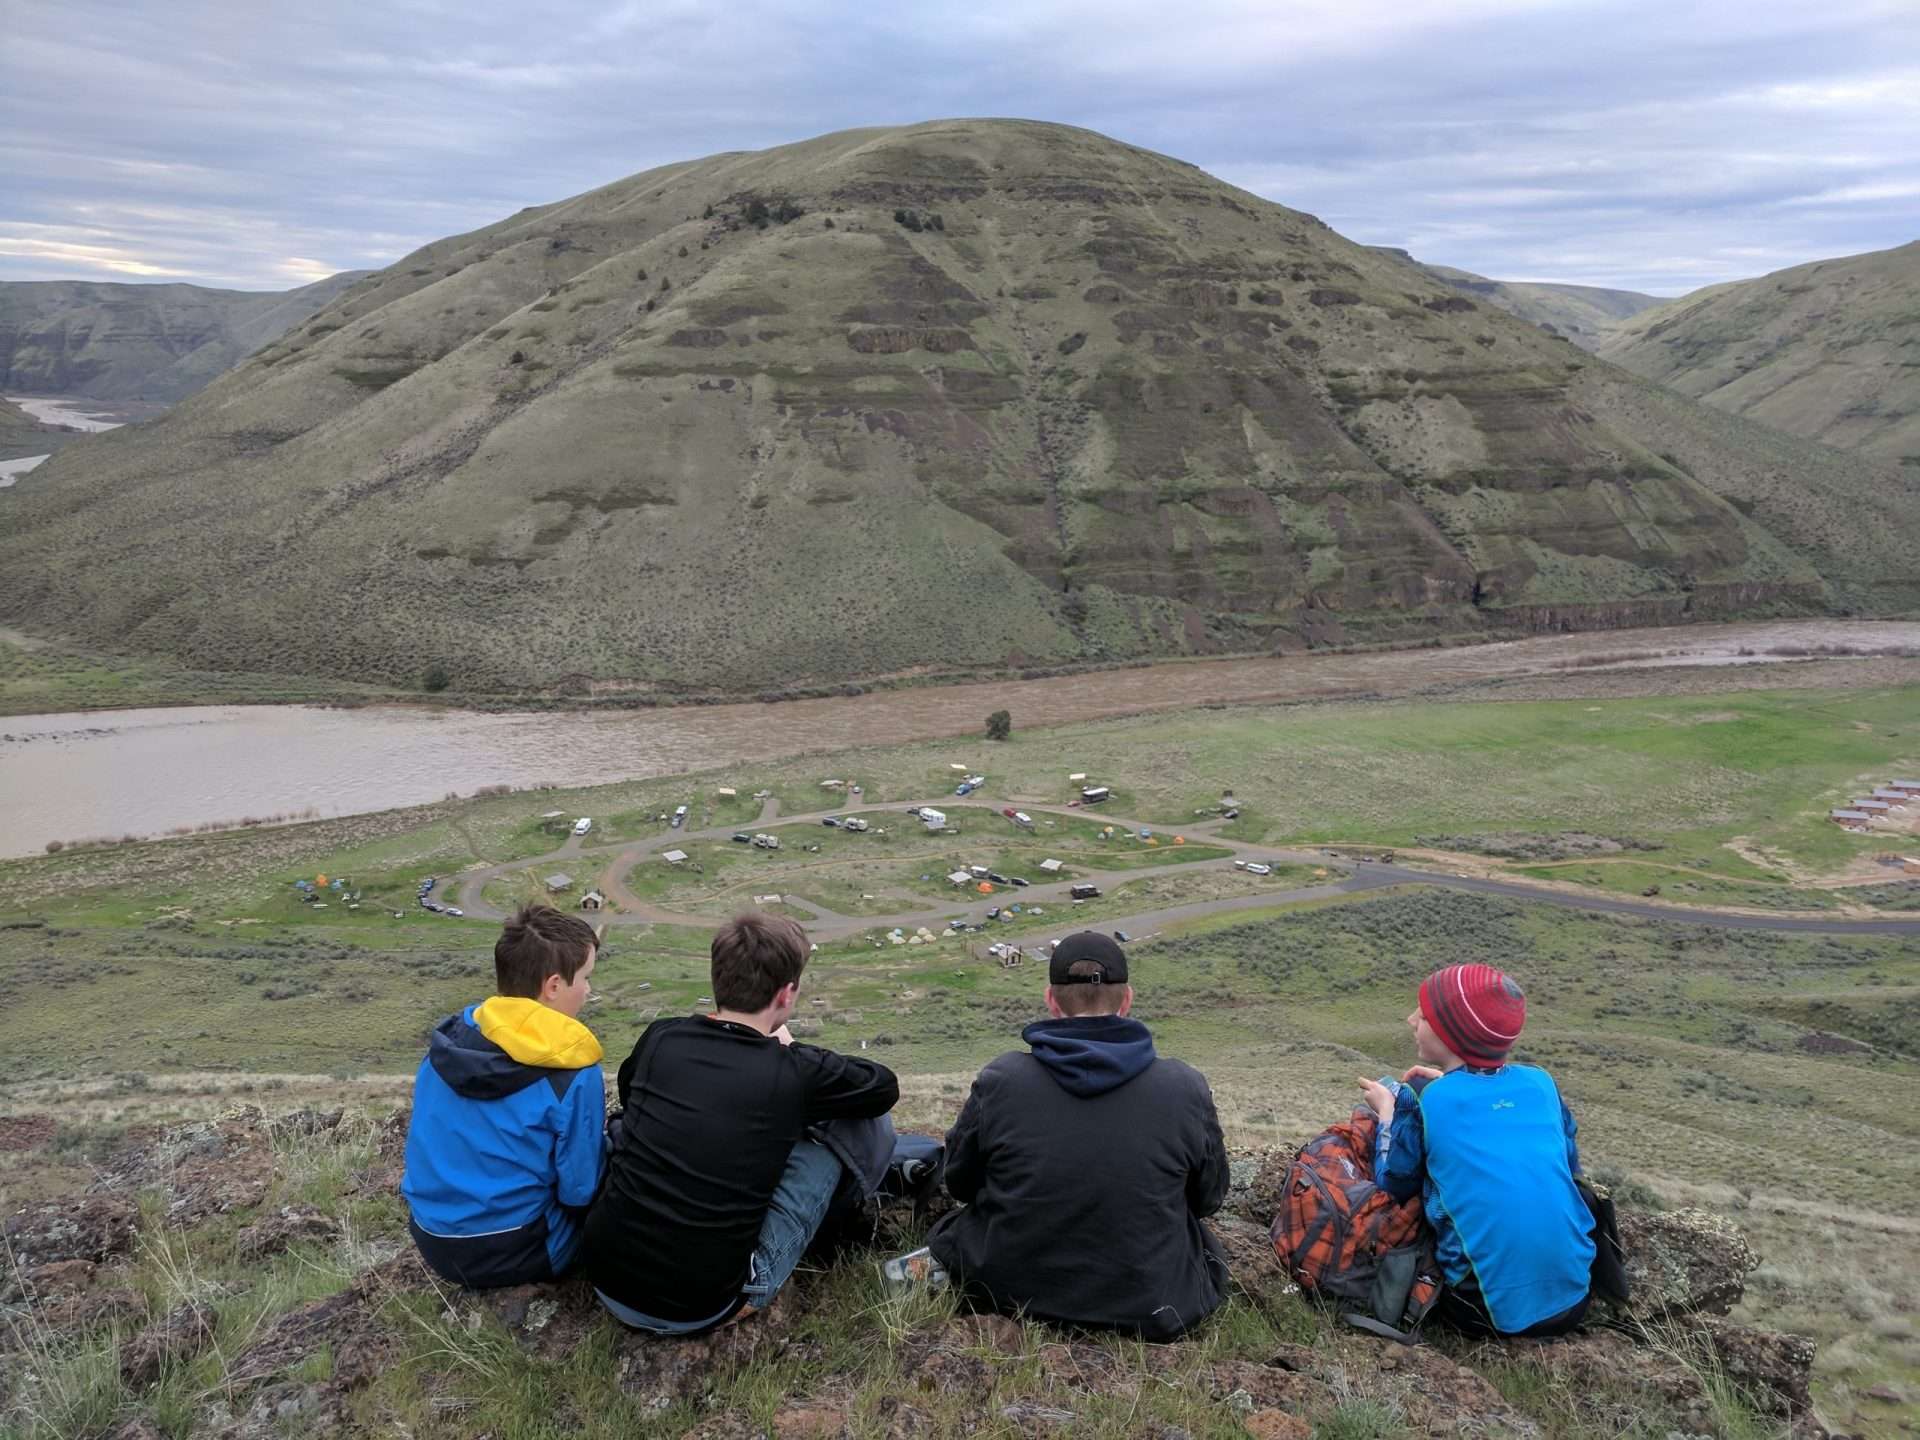 Four boys sitting on a hill overlooking a campground next to a muddy river, with a treeless slope across the river.